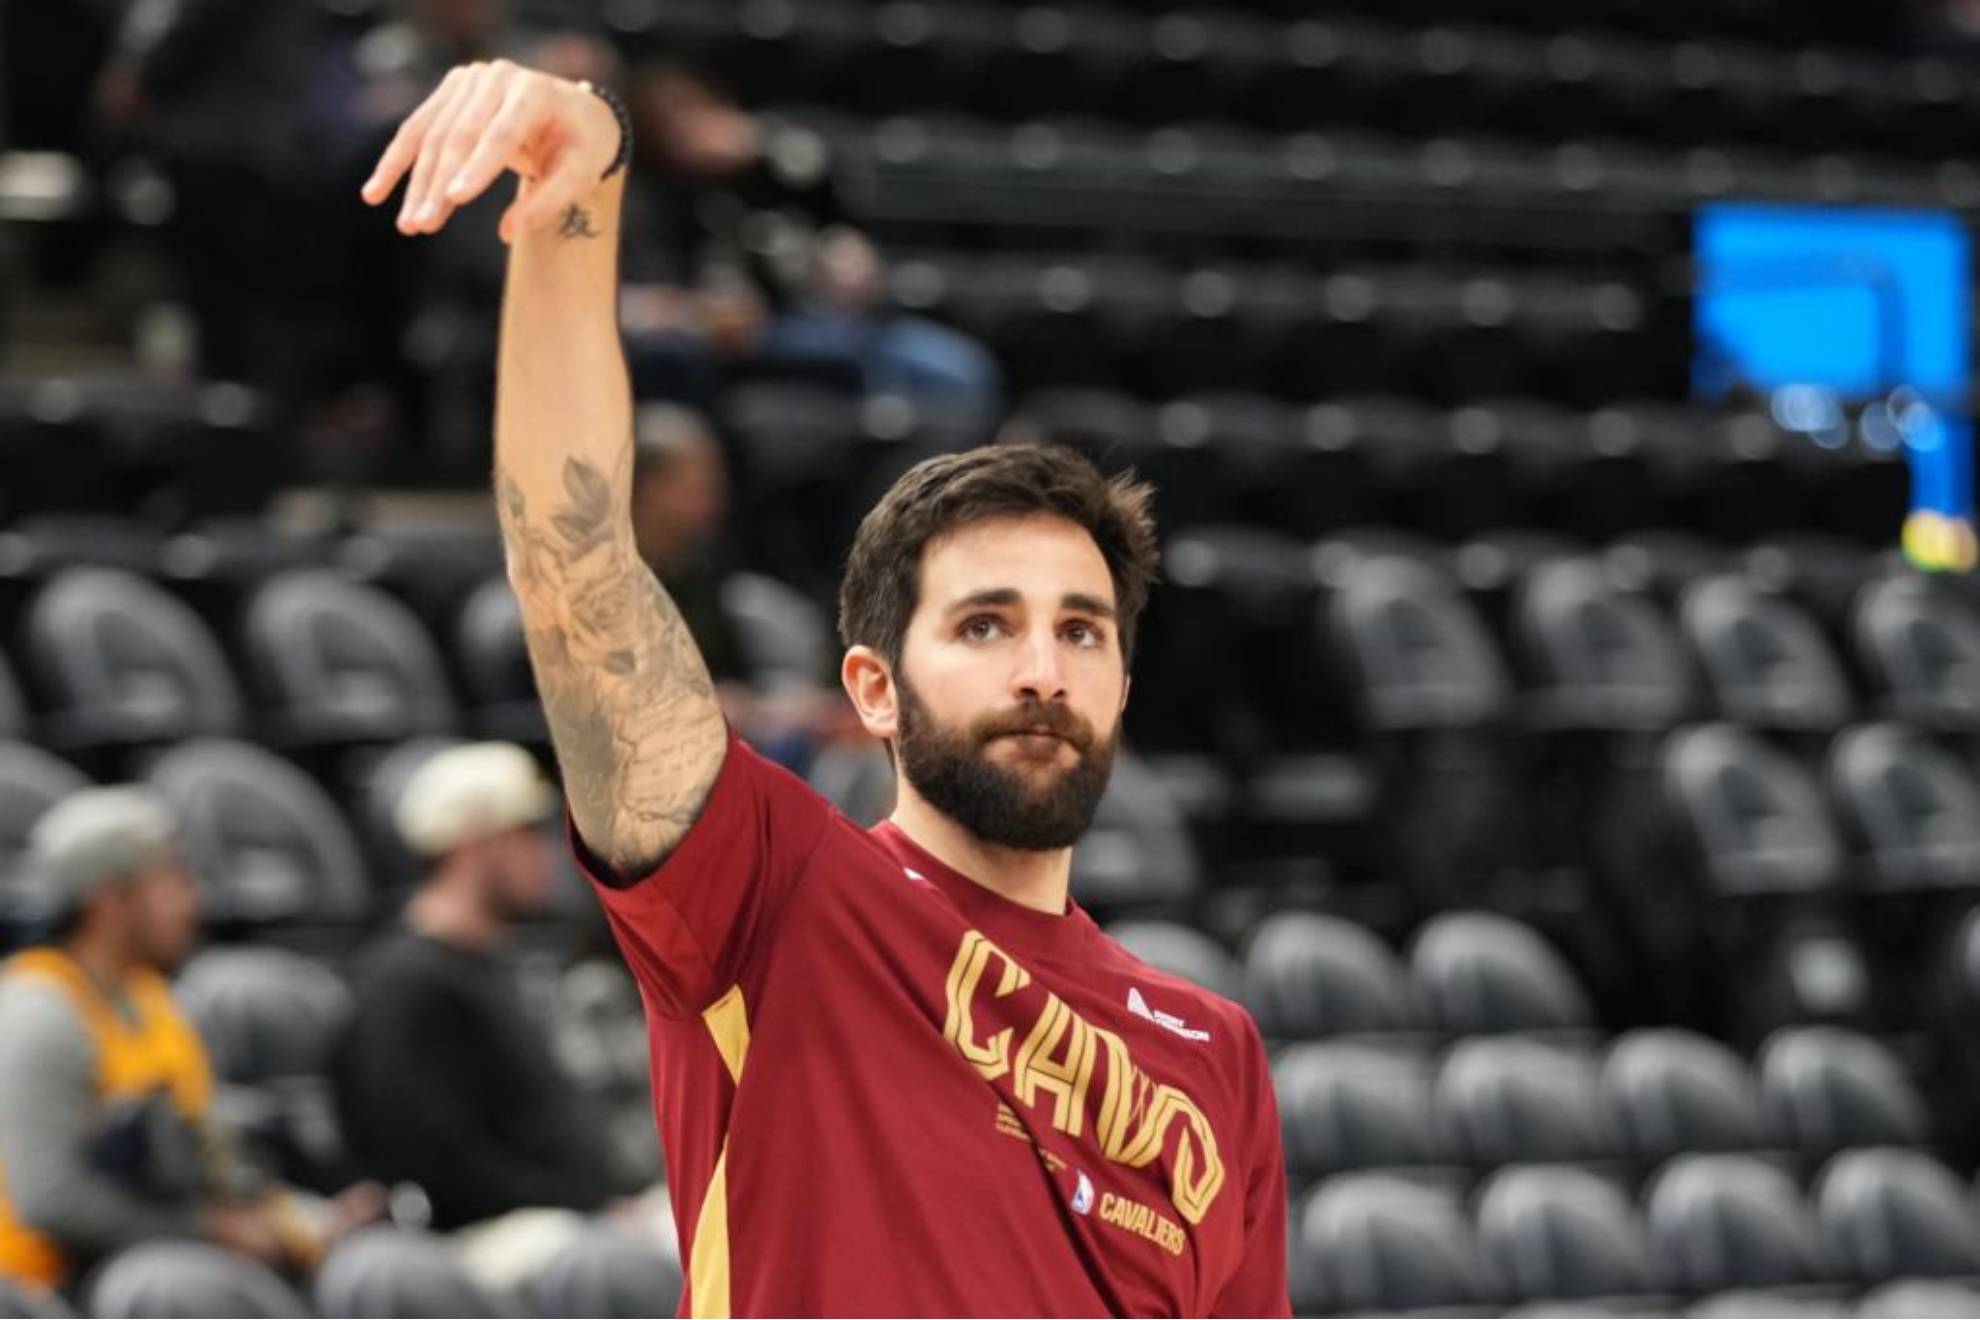 Ricky Rubio with the Cleveland Cavaliers